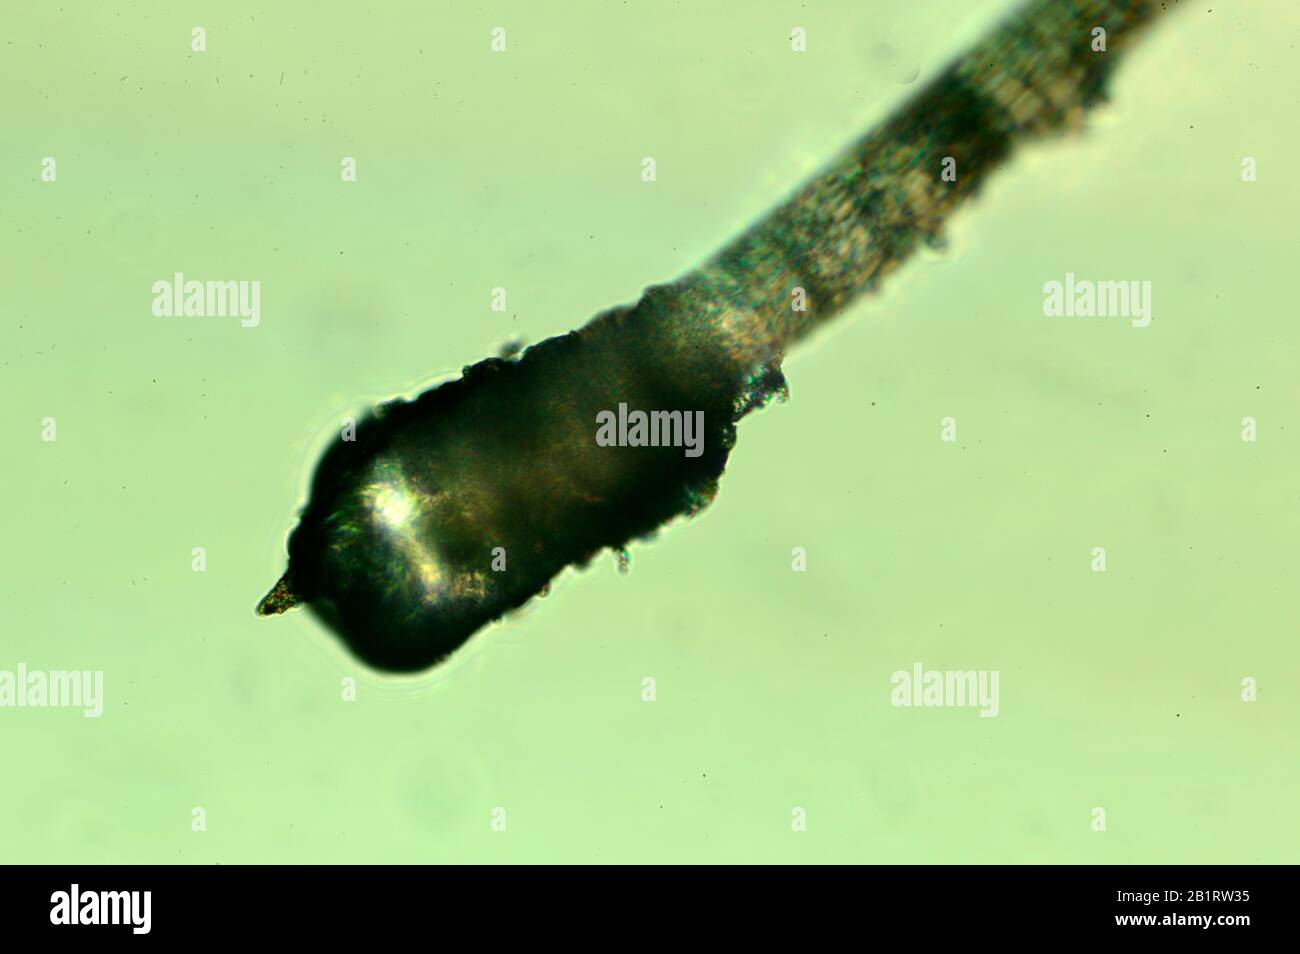 Human hair - with root.  A protein filament that grows from follicles found in the dermis. Hair is one of the defining characteristics of mammals. Stock Photo